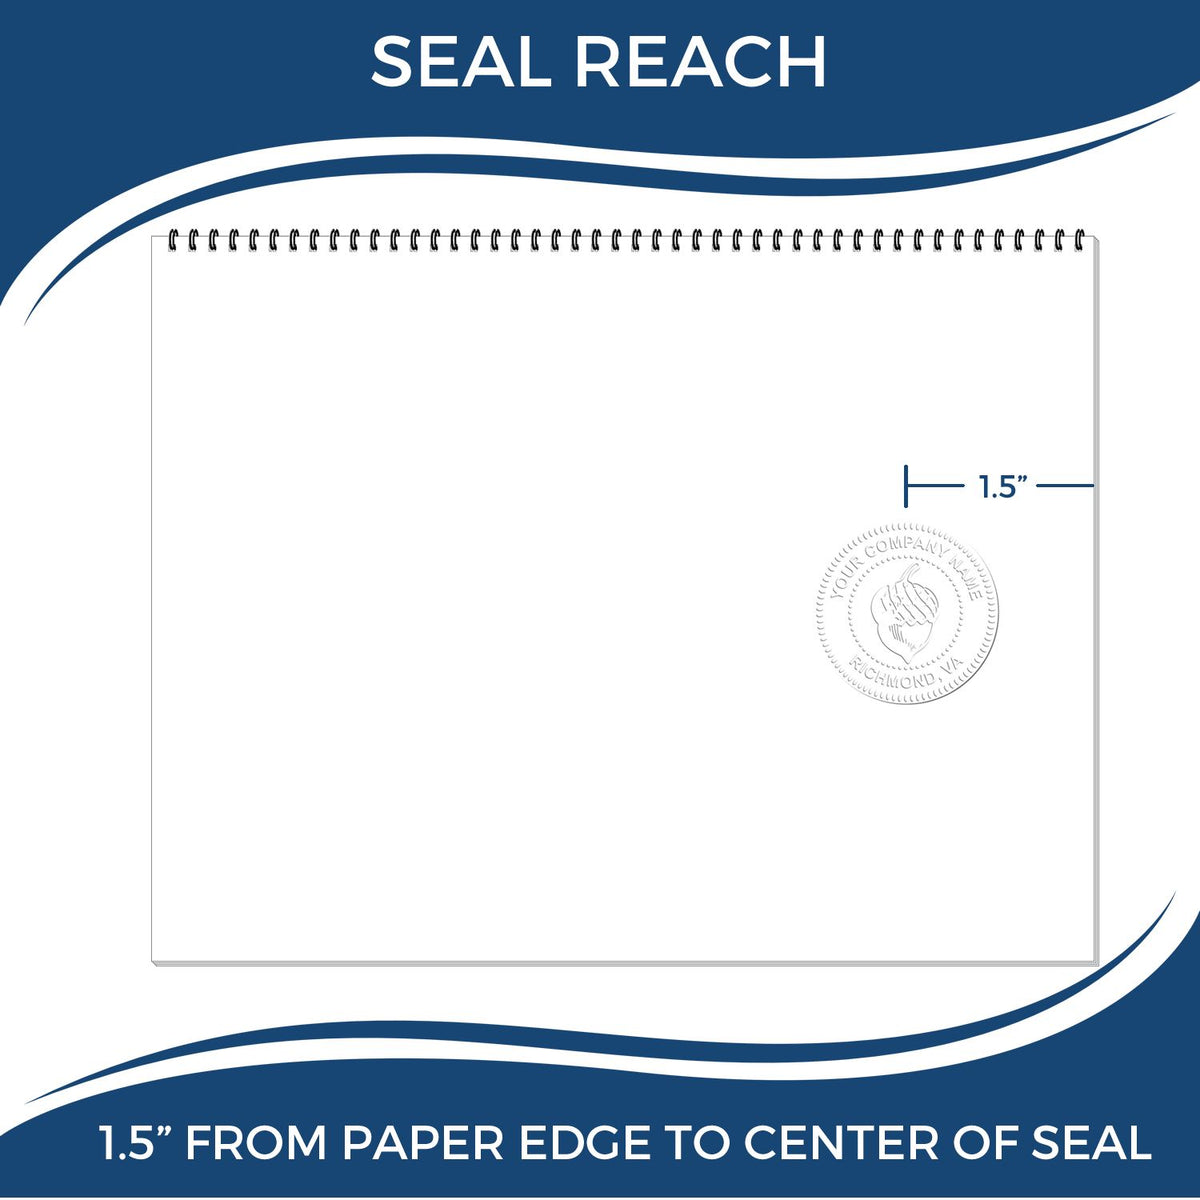 An infographic showing the seal reach which is represented by a ruler and a miniature seal image of the State of Florida Architectural Seal Embosser